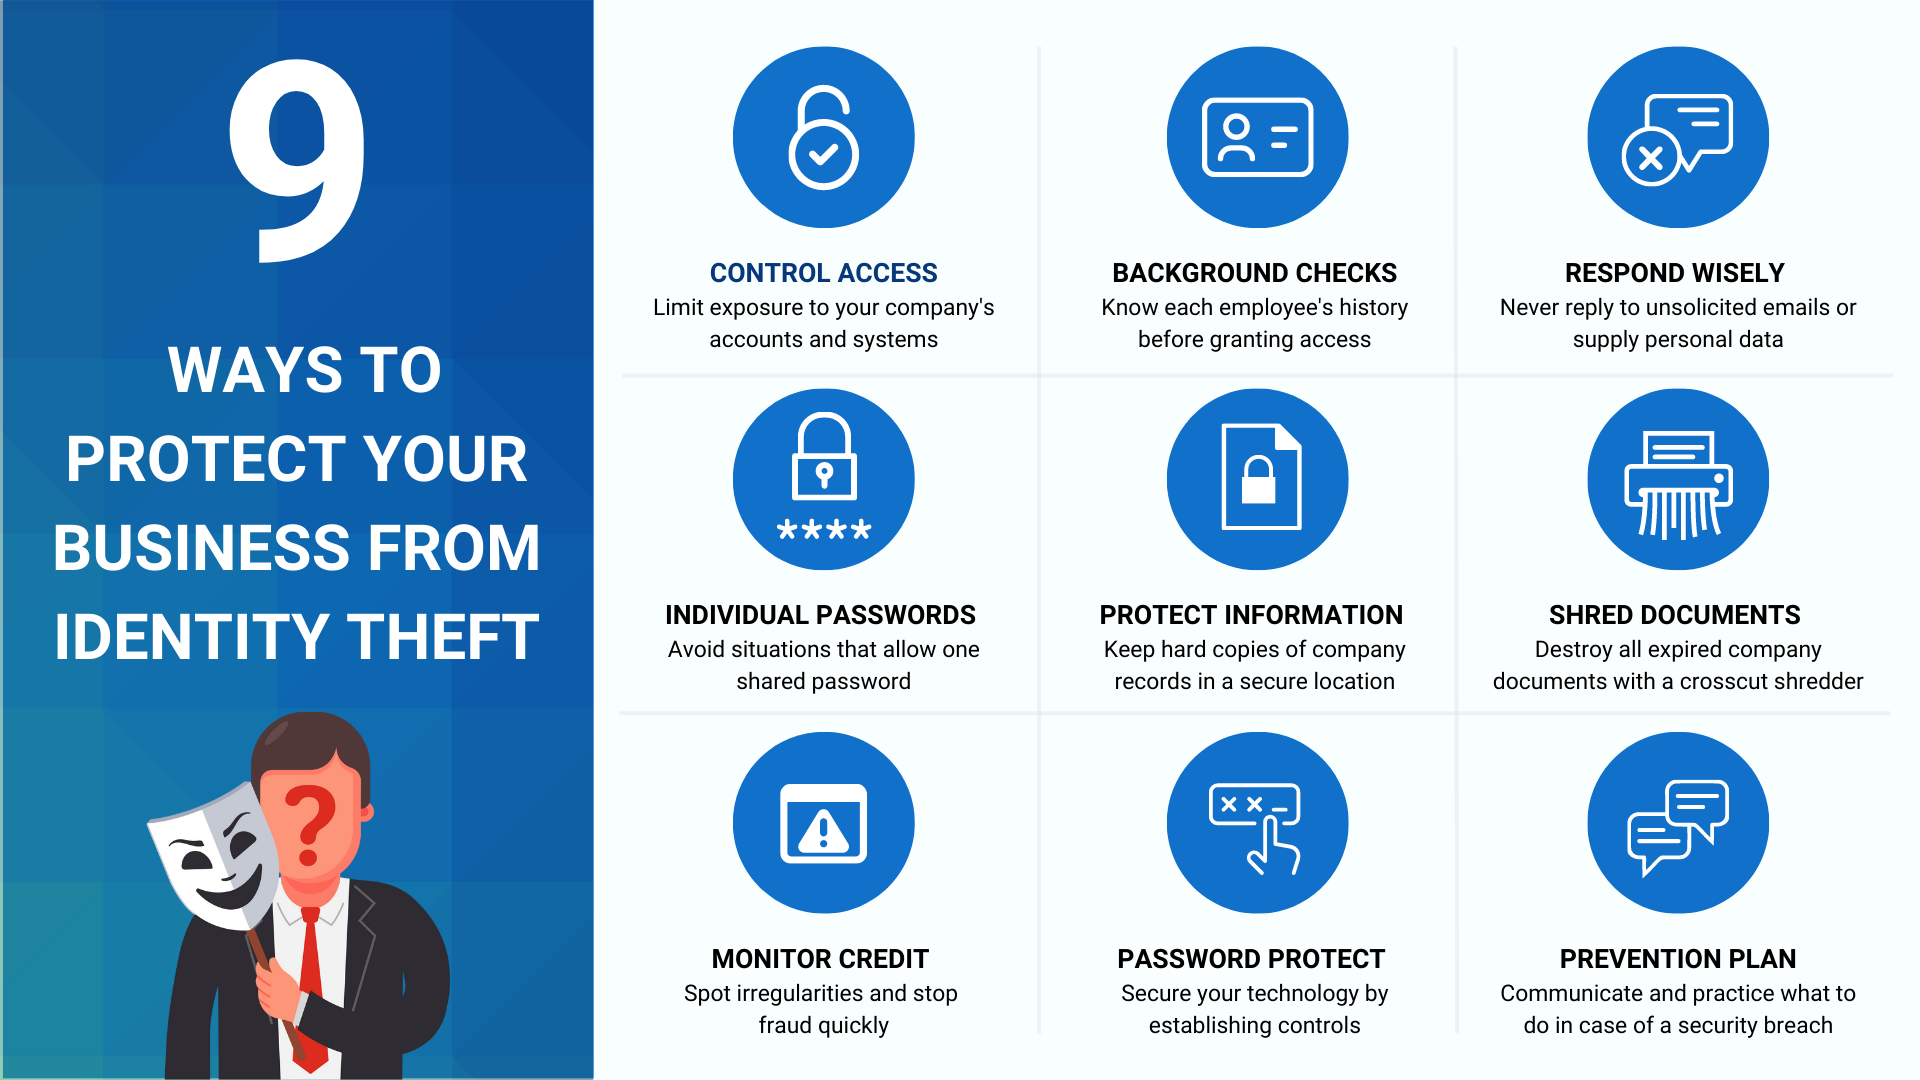 Protect your business from identity theft